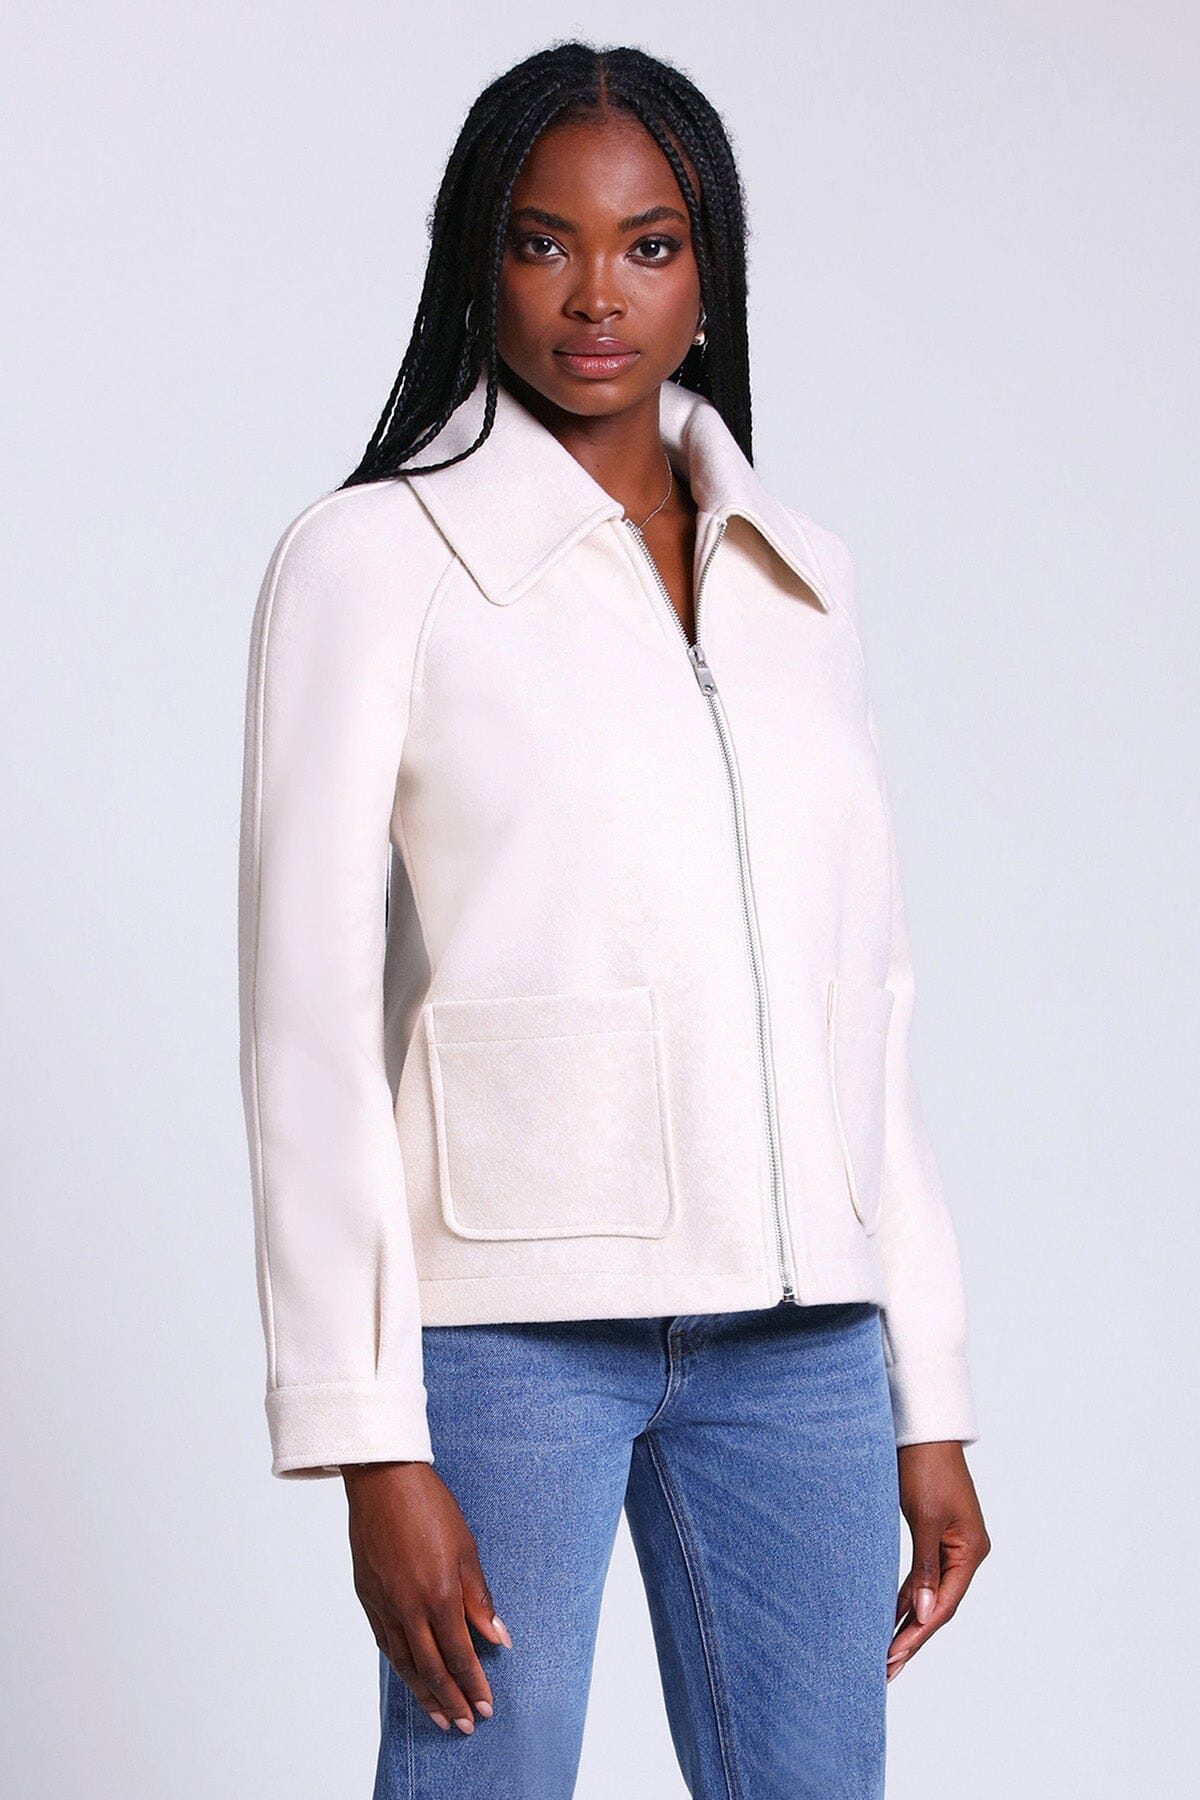 relaxed zip front jacket coat ivory white - figure flattering designer fashion work appropriate coats jackets for women